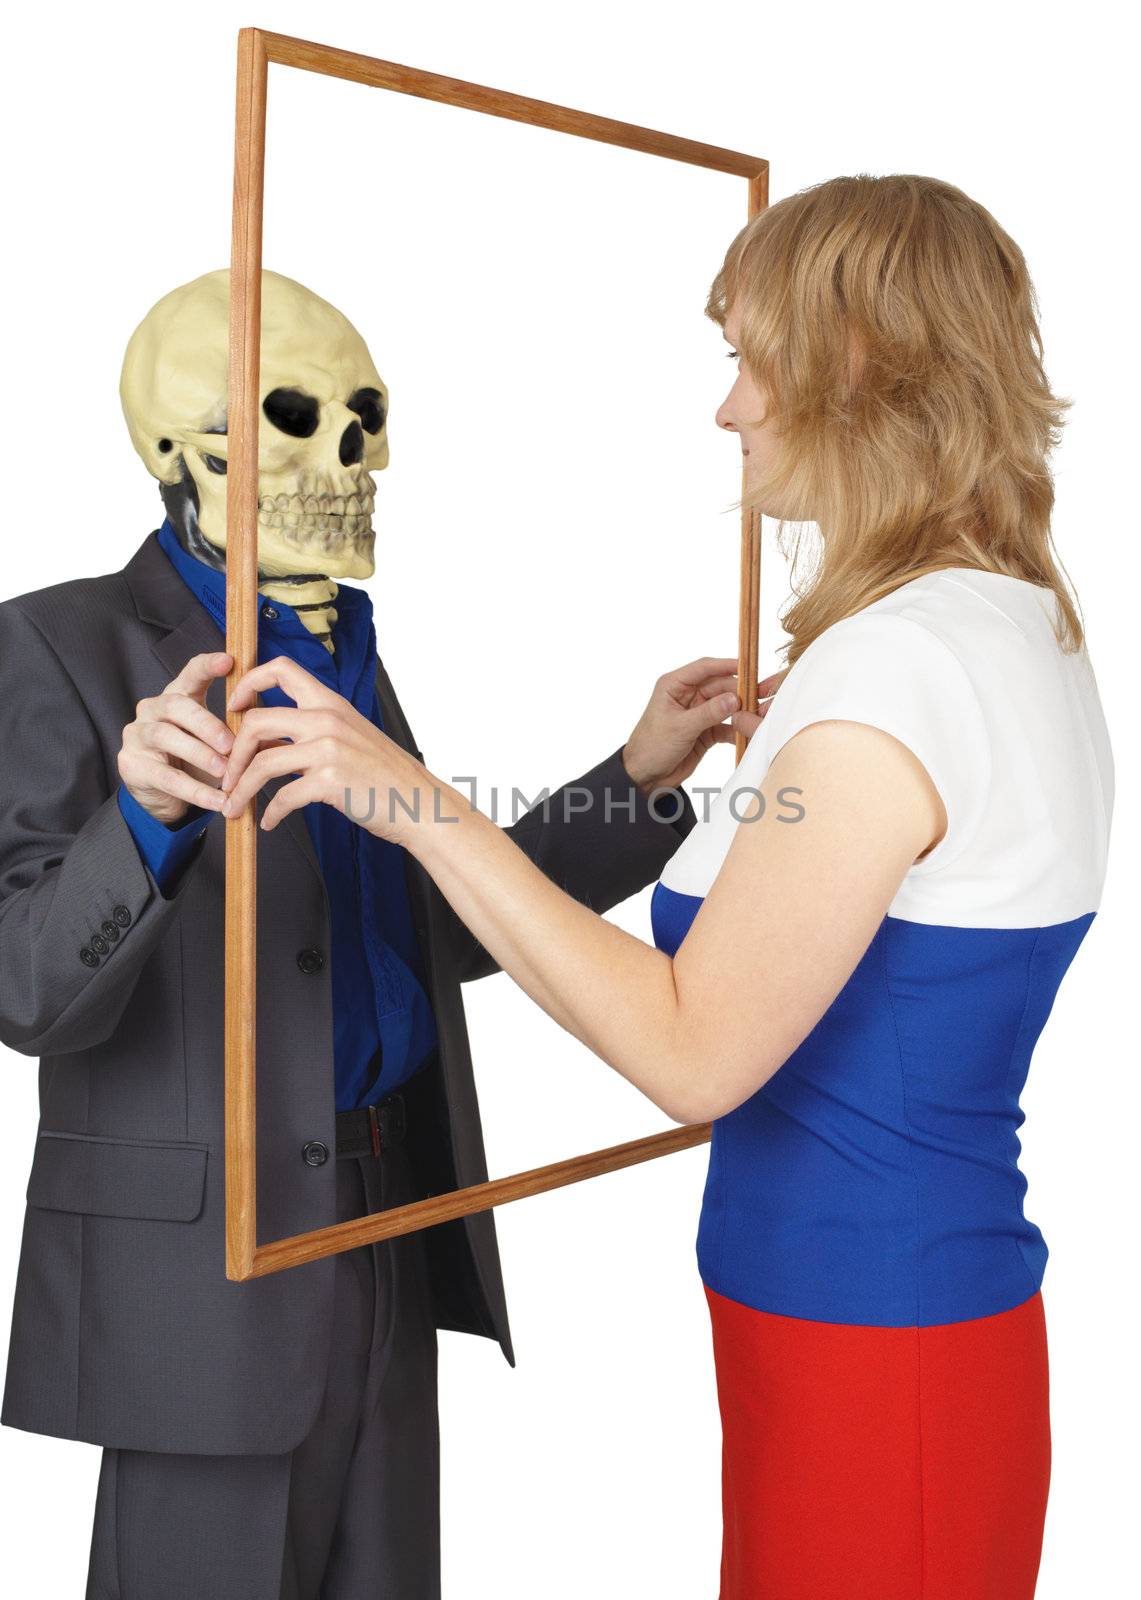 Woman looks at skeleton as reflected by pzaxe